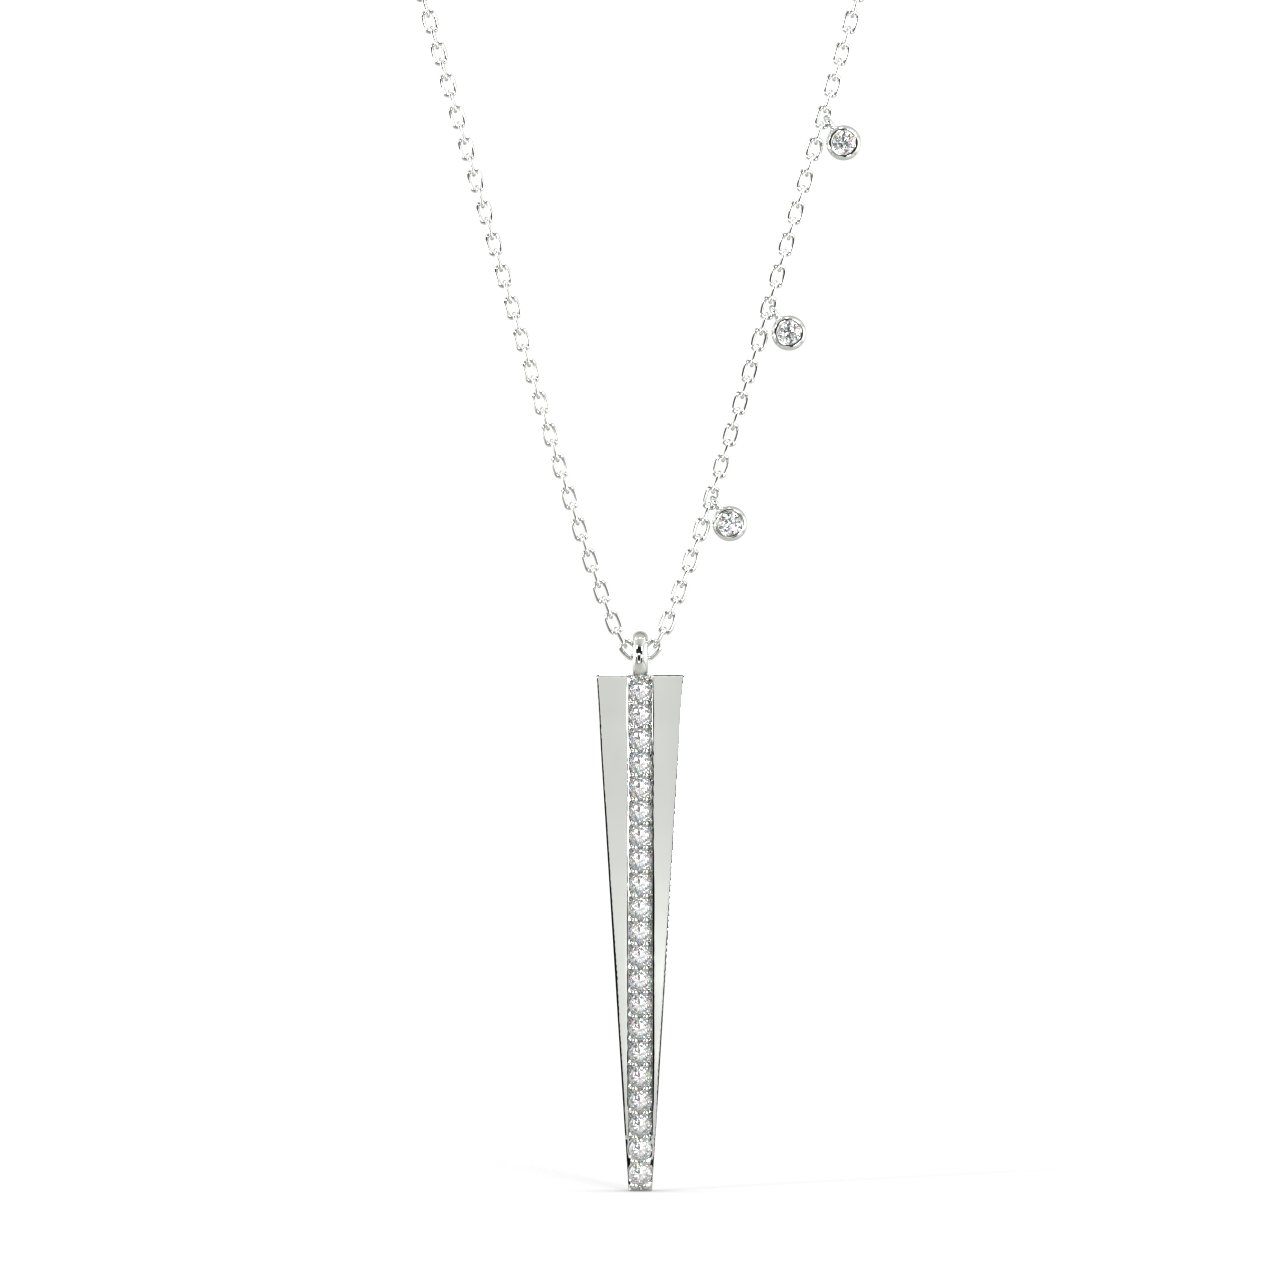 Layered Solitaire Necklace | Layering diamond necklaces, Diamond pendant  necklace solitaire, Solitaire pendant necklace